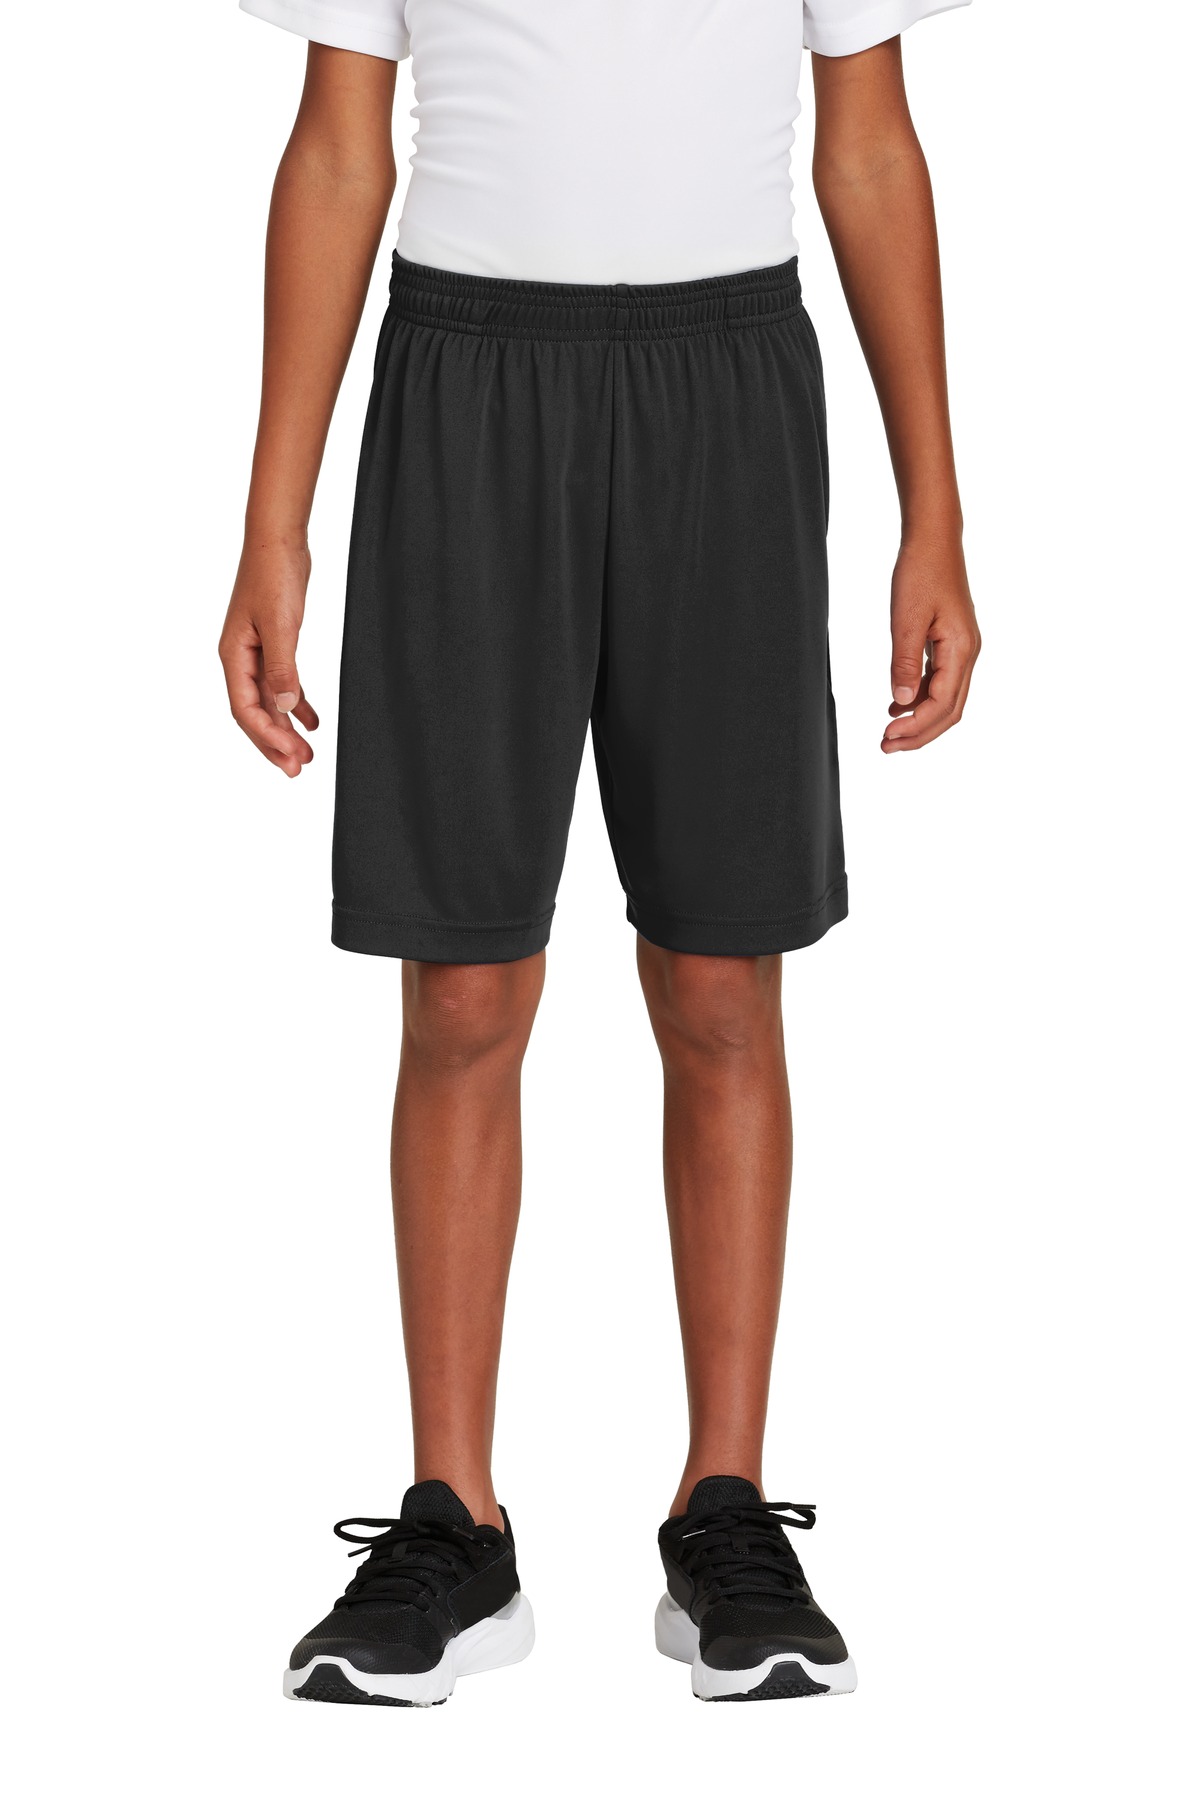 Sport-Tek Youth PosiCharge Competitor Pocketed Short - YST355P